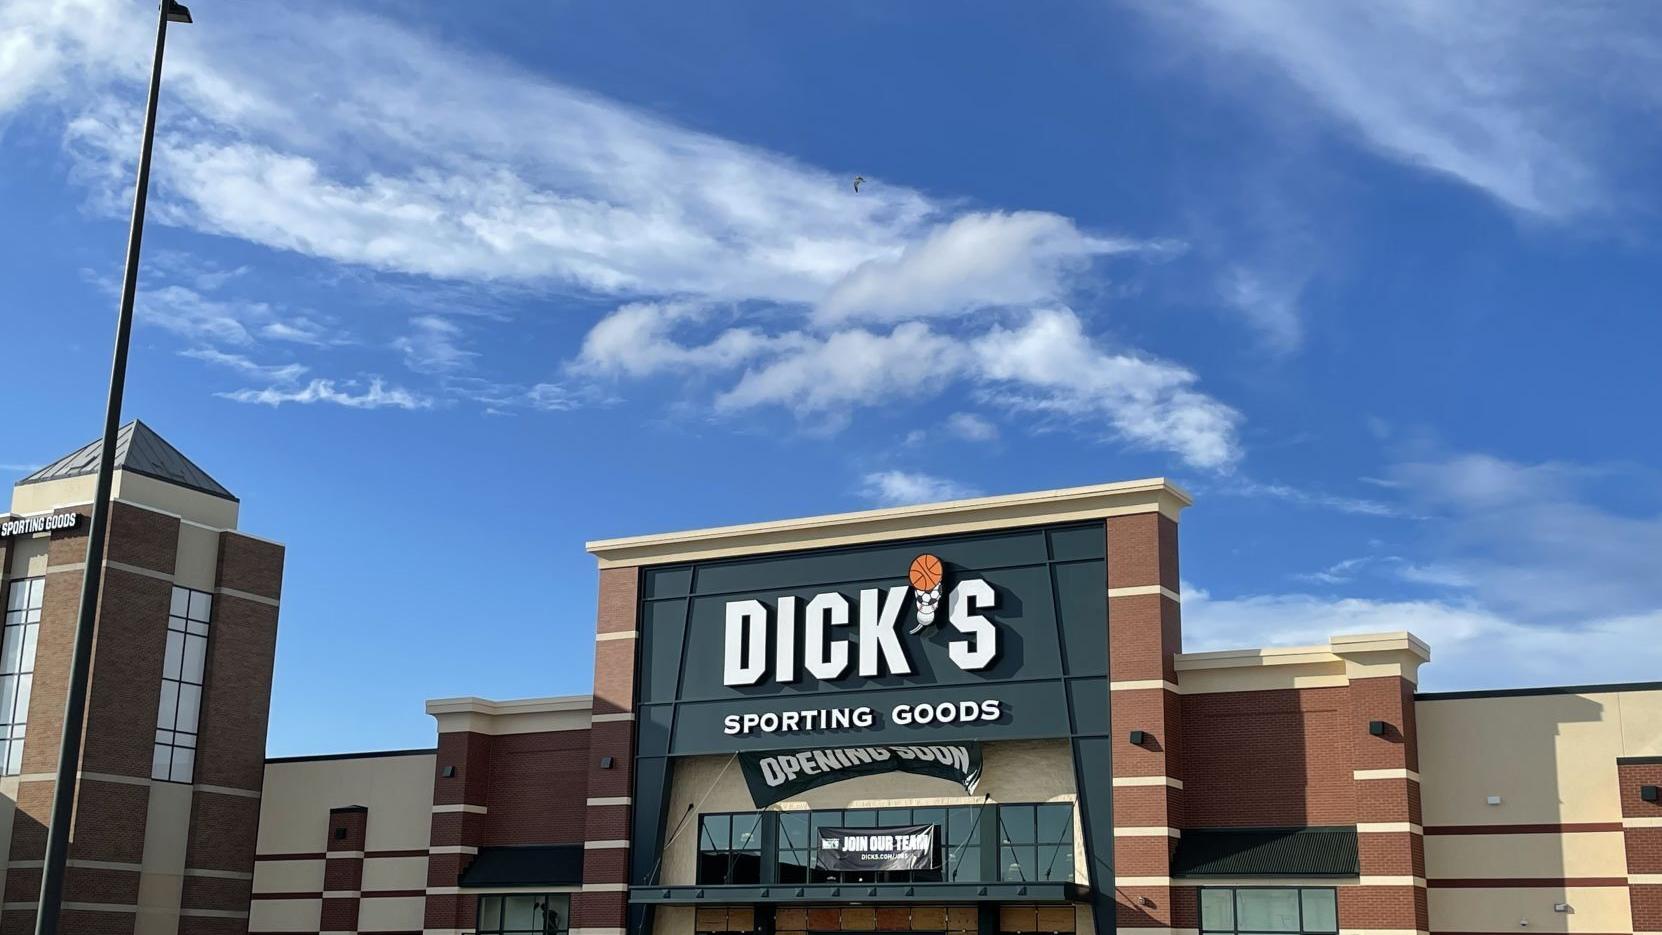 Dicks Sporting Goods Exiting Southlake Mall To Move Across The Street In Loss Of Another Anchor Northwest Indiana Business Headlines Nwitimescom